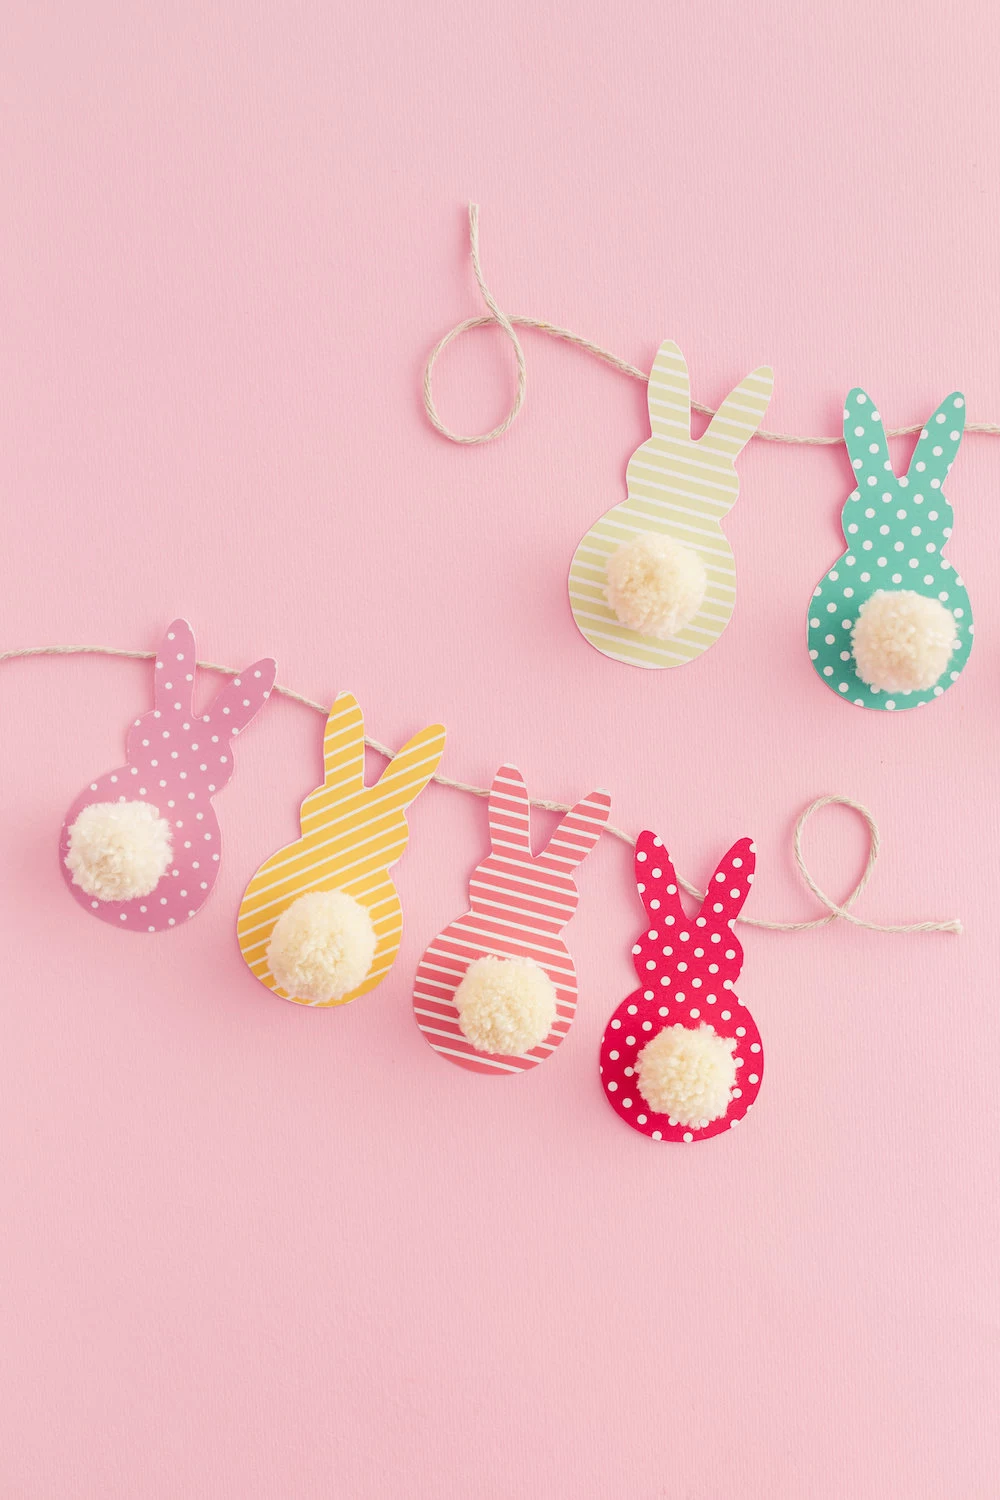 easter crafts for kids, garland made from string, and colorful patterned paper, cut in rabbit shapes, with little white cotton ball tails